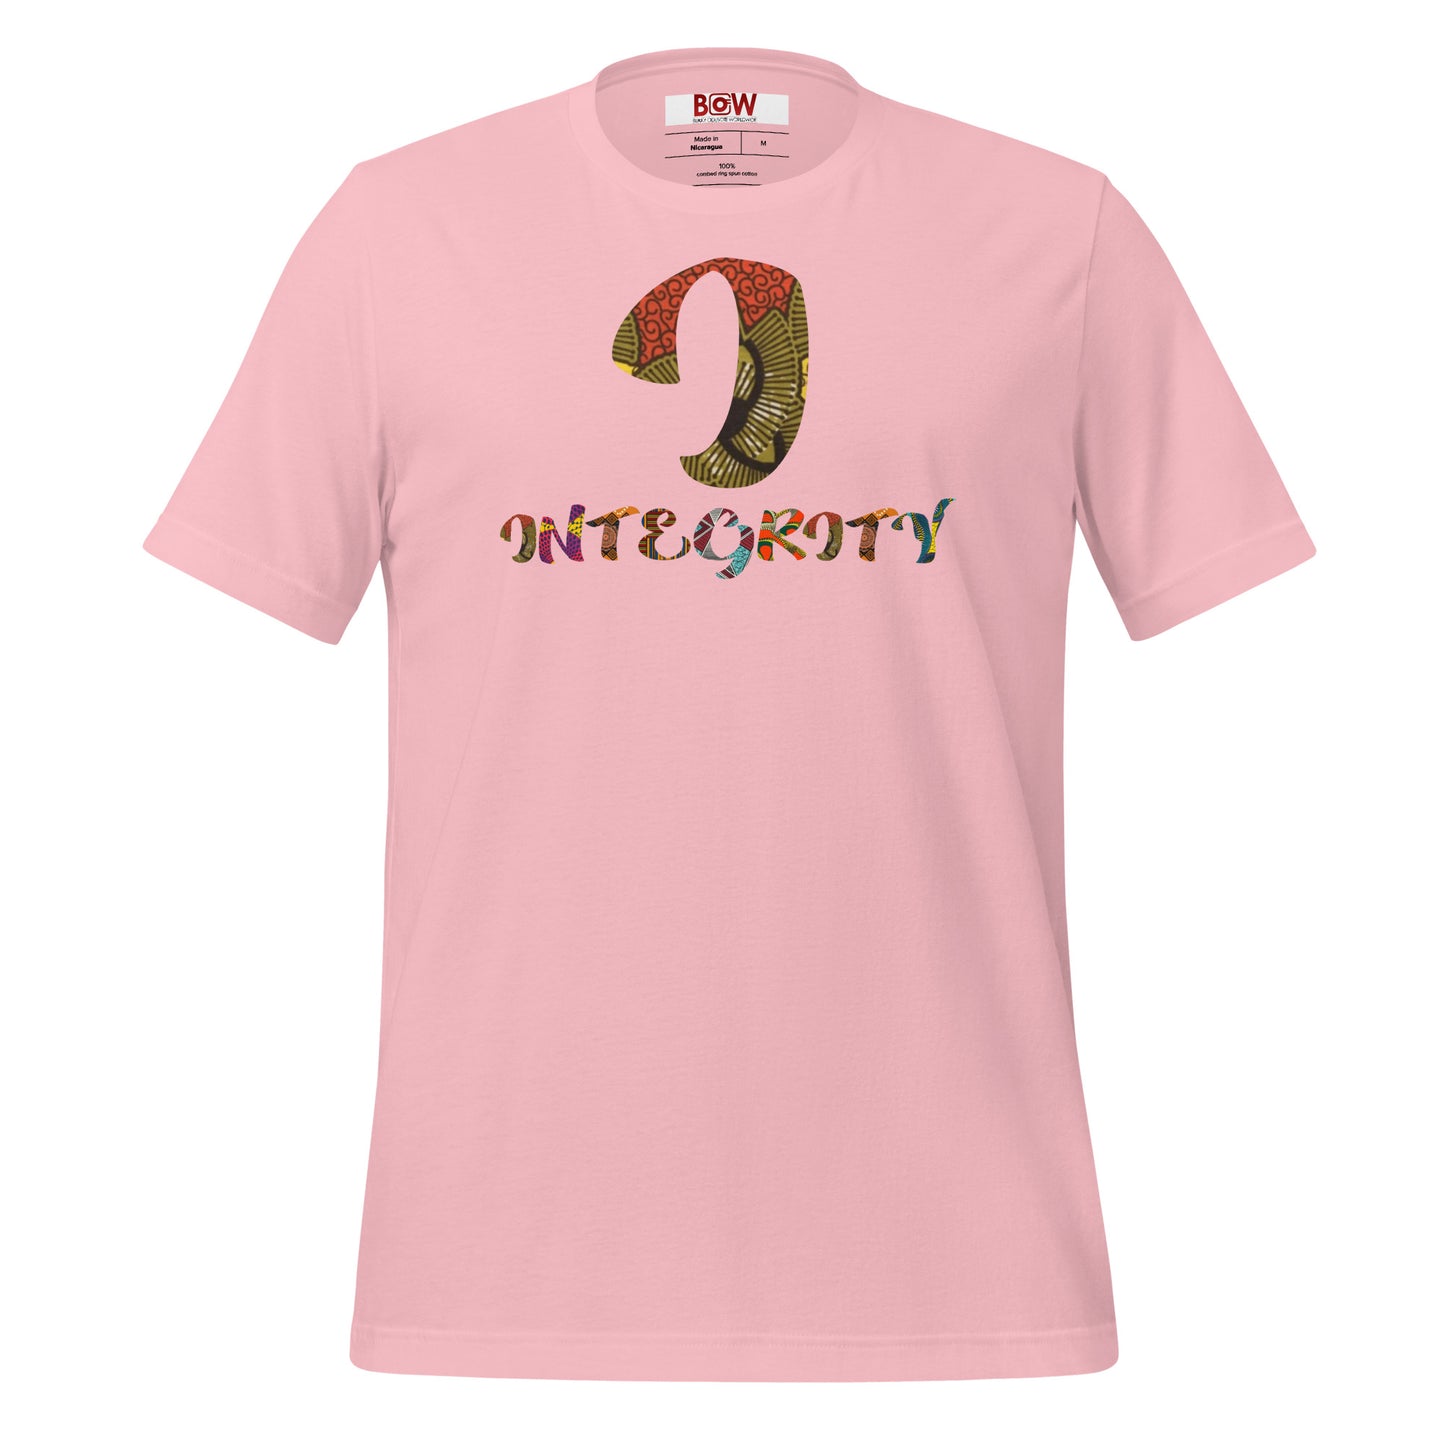 I For Integrity Unisex Afro Graphic T-Shirt